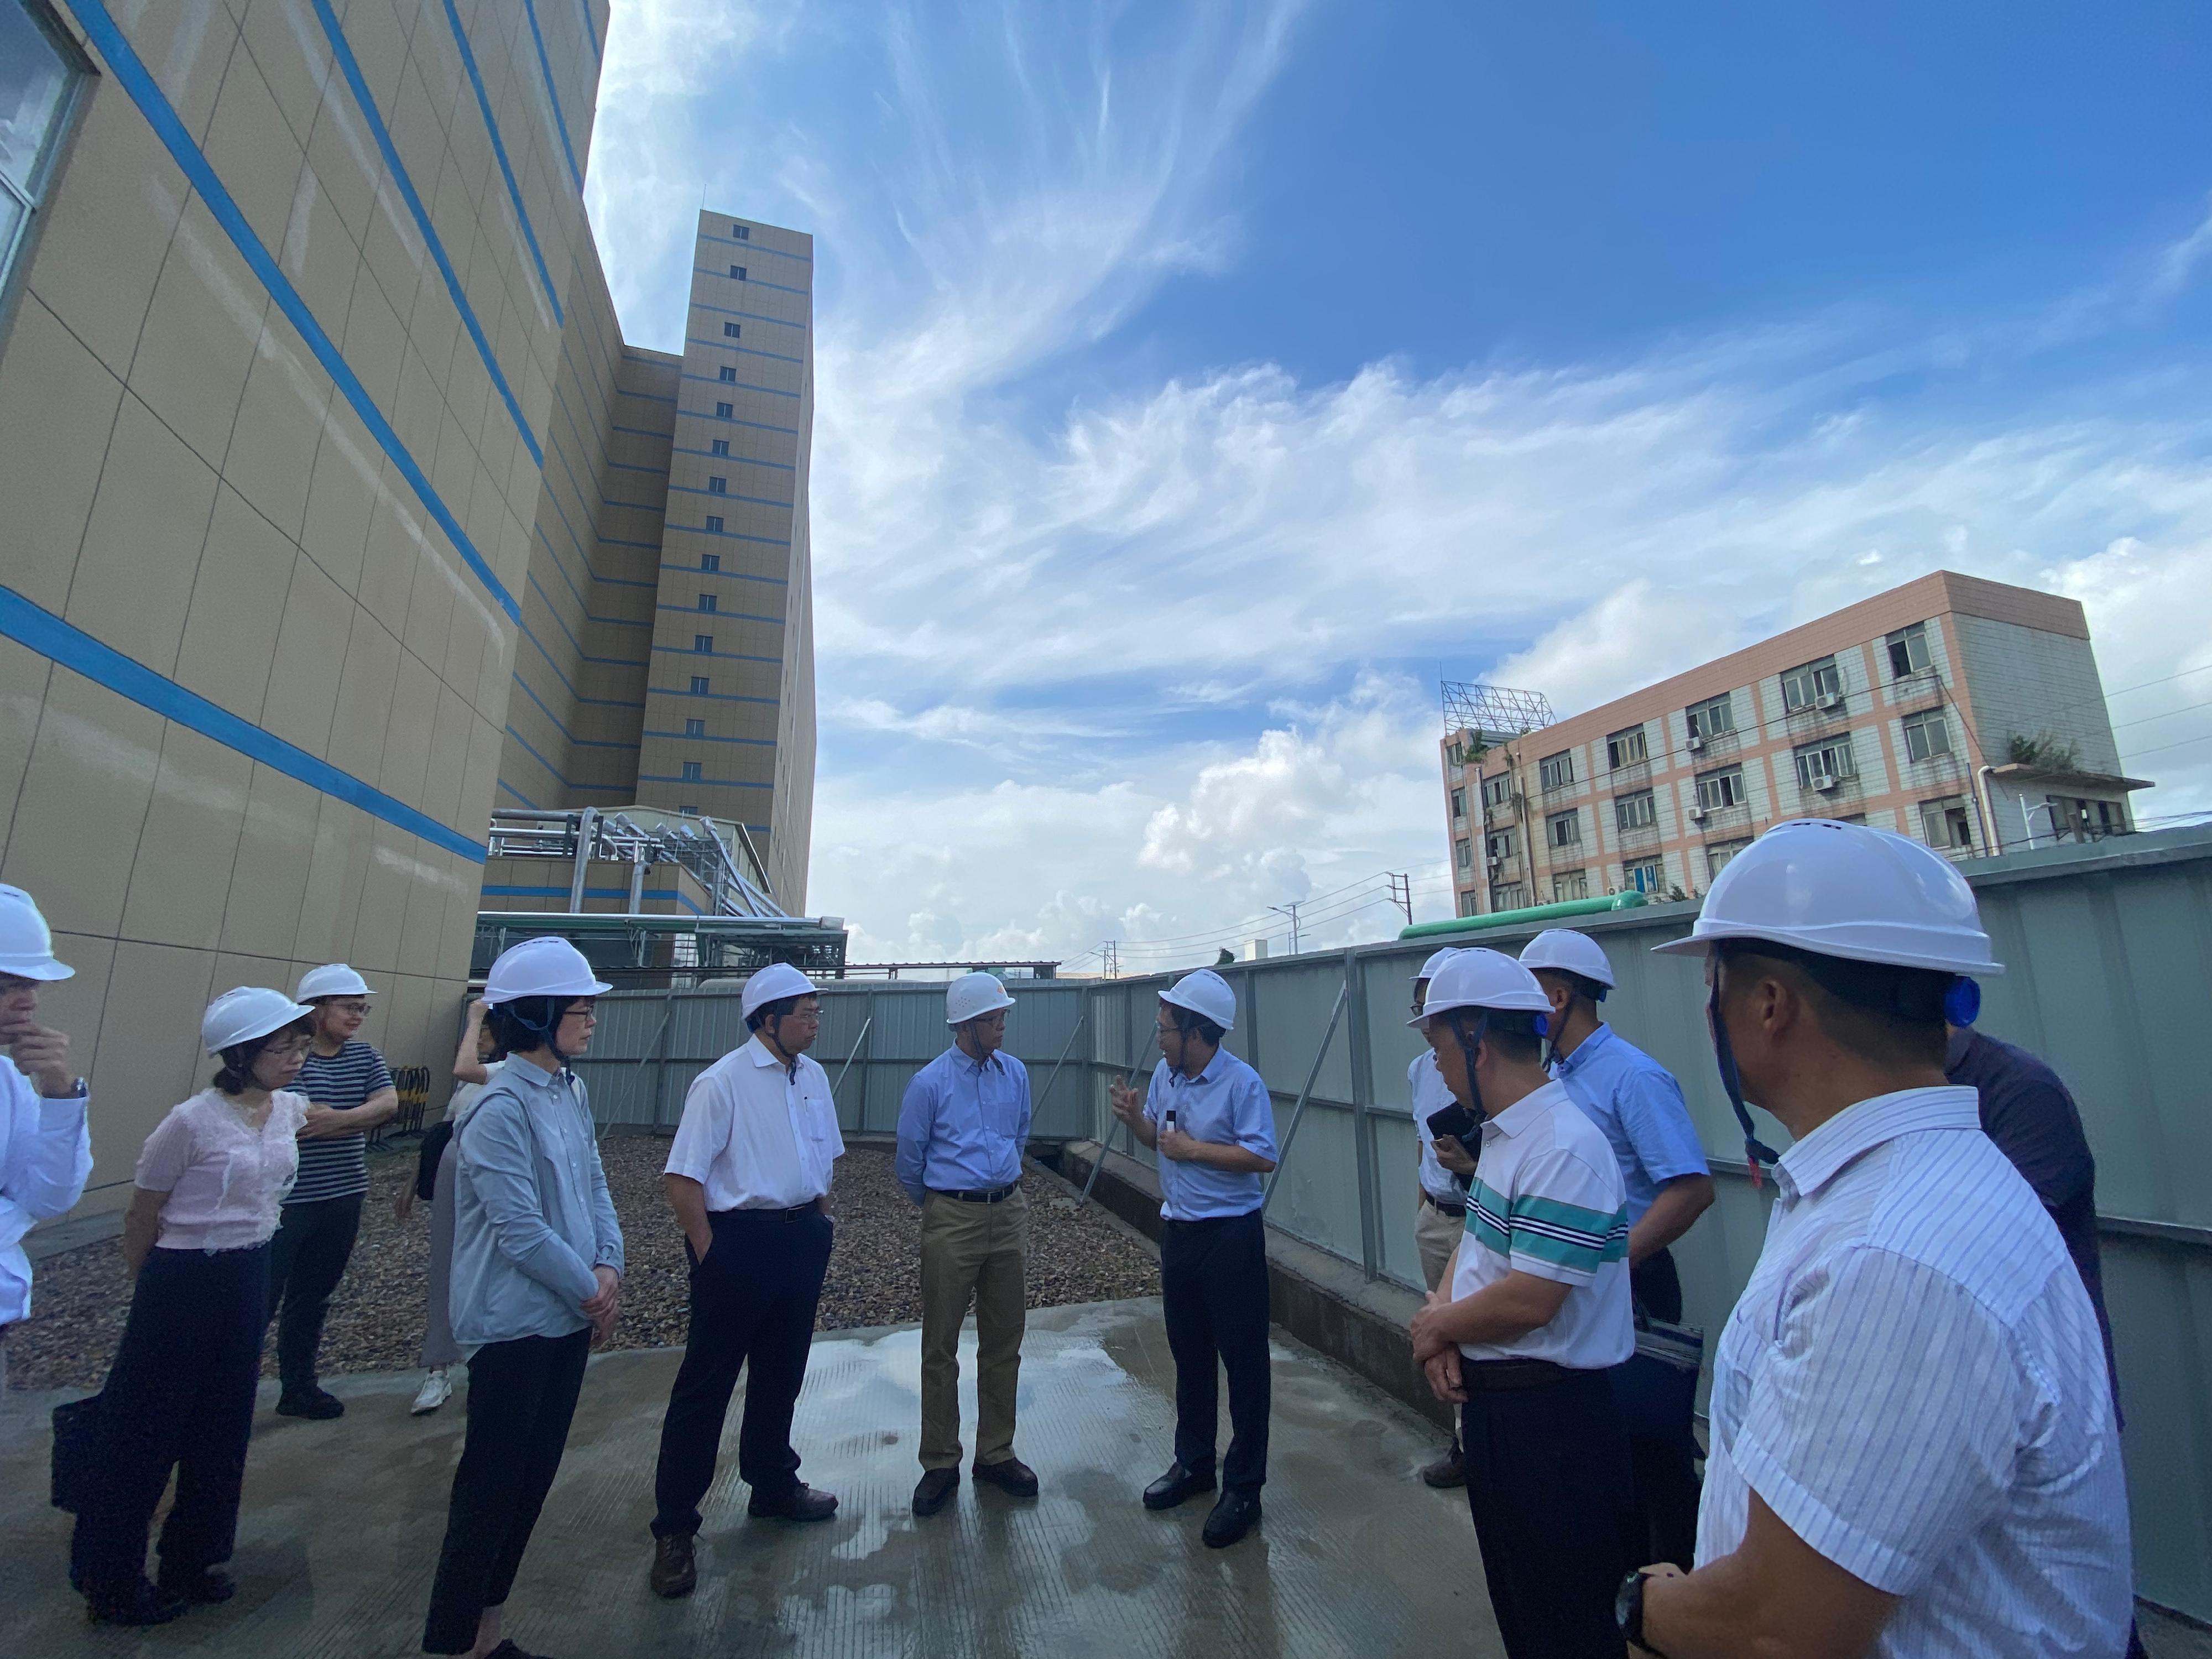 The Secretary for Environment and Ecology, Mr Tse Chin-wan, visited a high-rise pig farm in Nansha District of Guangzhou yesterday morning (July 19). Photo shows Mr Tse (fifth left); the Permanent Secretary for Environment and Ecology (Food), Miss Vivian Lau (third left); and the Director of Agriculture, Fisheries and Conservation, Dr Leung Siu-fai (fourth left), receiving a briefing from a representative on the operation of the pig farm.